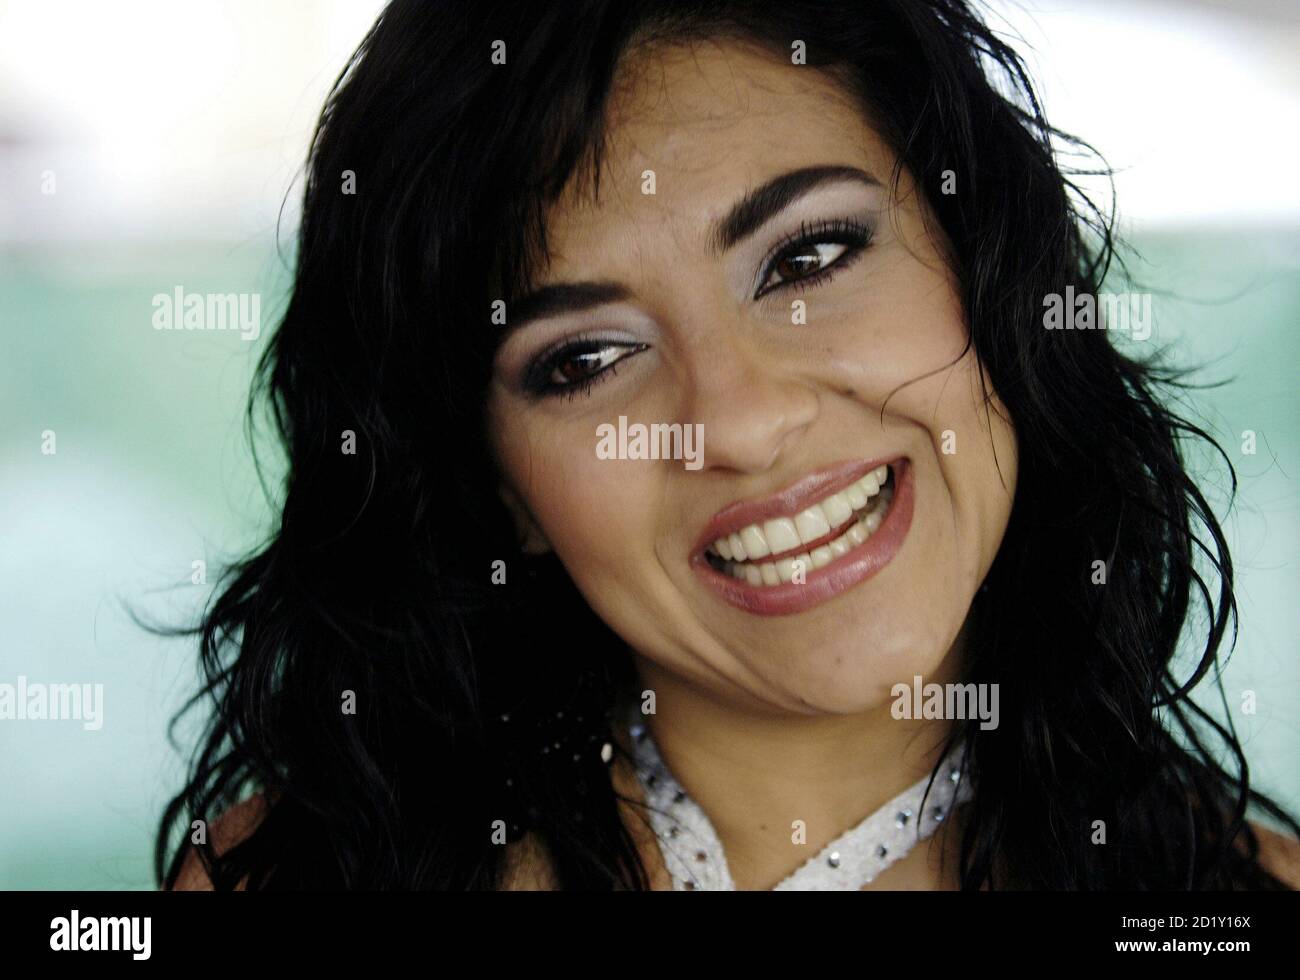 Mexican singer Graciela Beltran smiles backstage during the AT&T Fiesta Broadway in downtown Los Angeles April 30, 2006. [The Cinco de Mayo celebration featured musical entertainment, sporting activities and charitable and family activities over 36 blocks in downtown Los Angeles.] Stock Photo